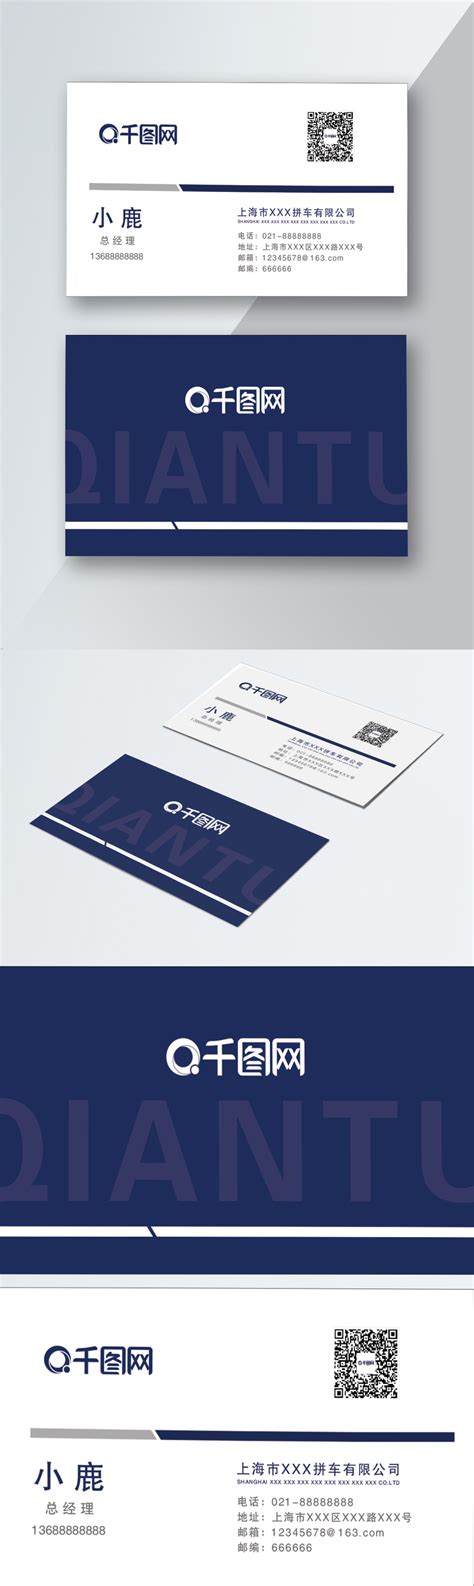 Carpool Business Card Download Template Imagepicture Free Download